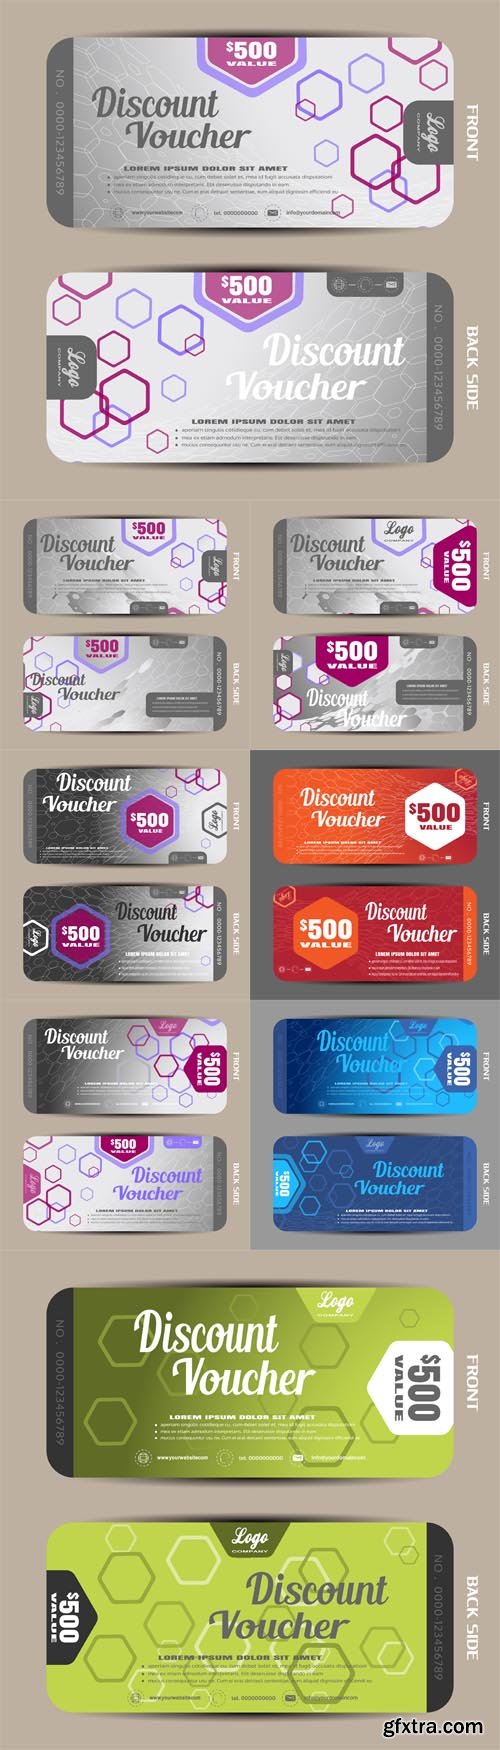 Vector Set - Voucher Illustrations on the Gradient Background and Hexagon Pattern